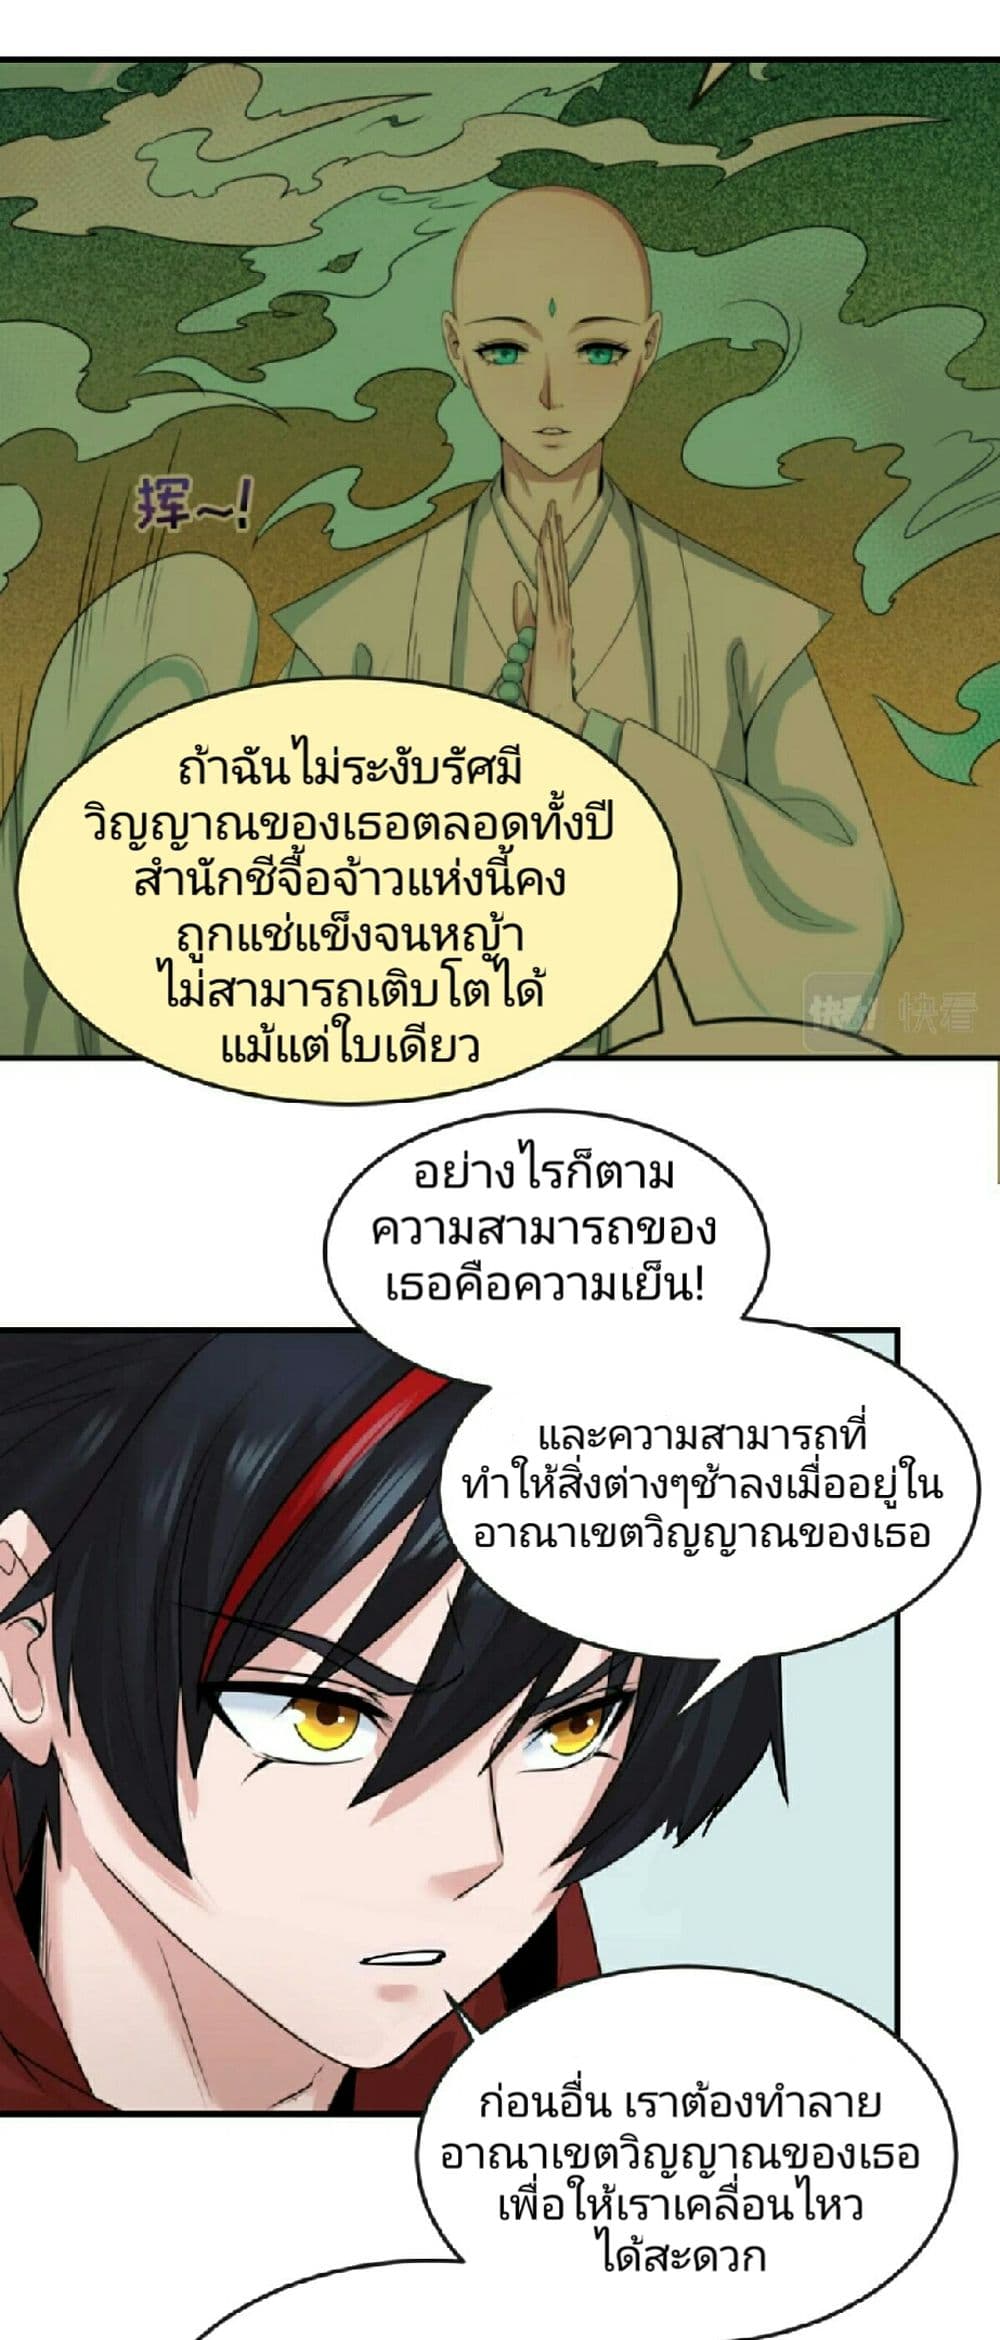 The Age of Ghost Spirits à¸à¸­à¸à¸à¸µà¹ 50 (30)